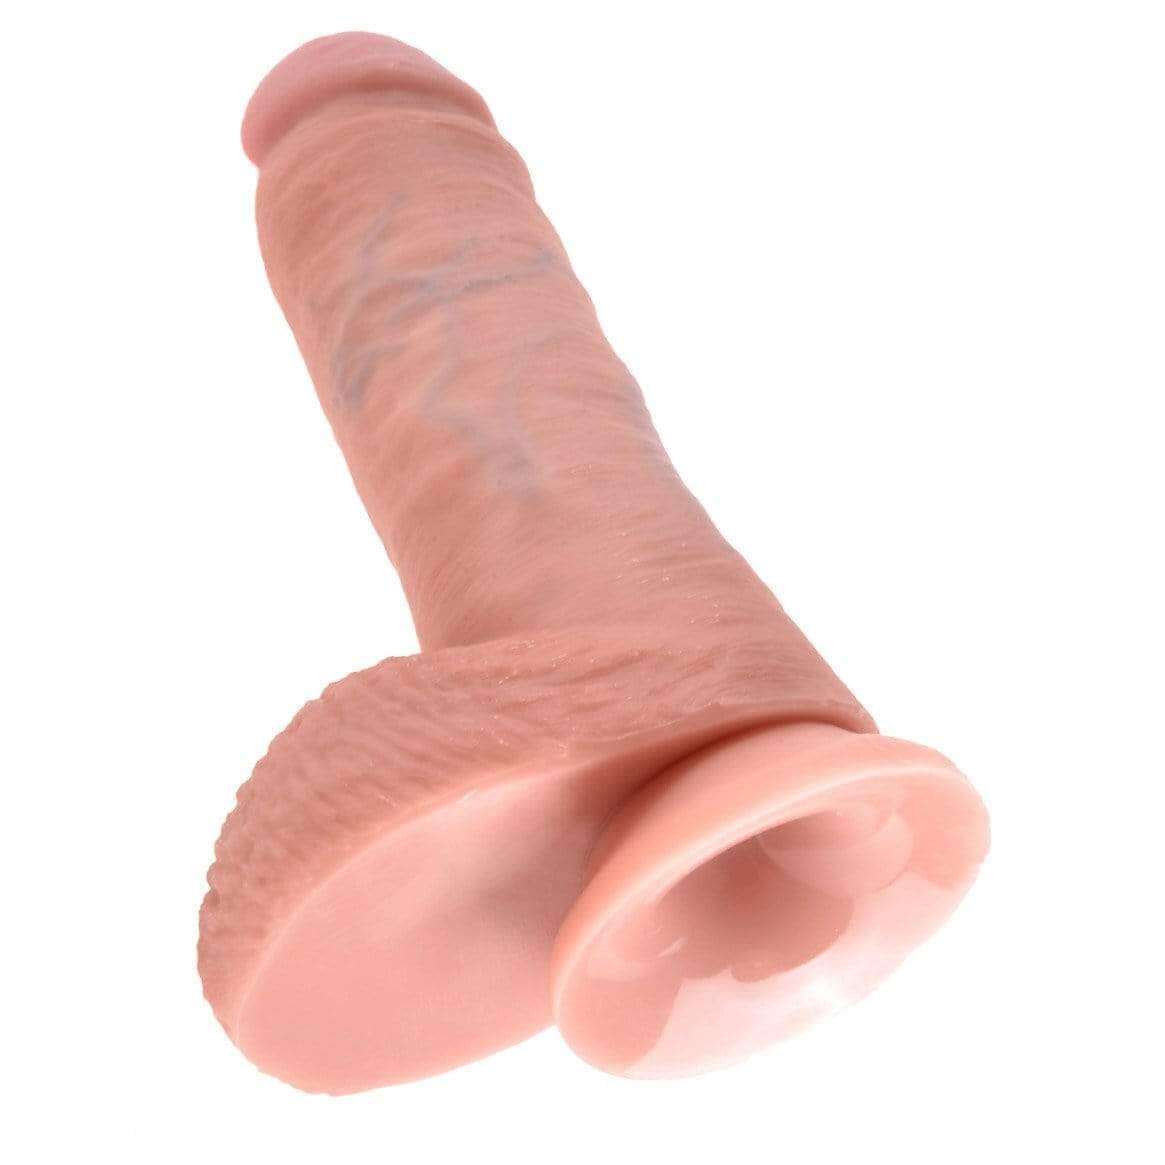 King Cock 8" Cock with Balls - Flesh - Thorn & Feather Sex Toy Canada